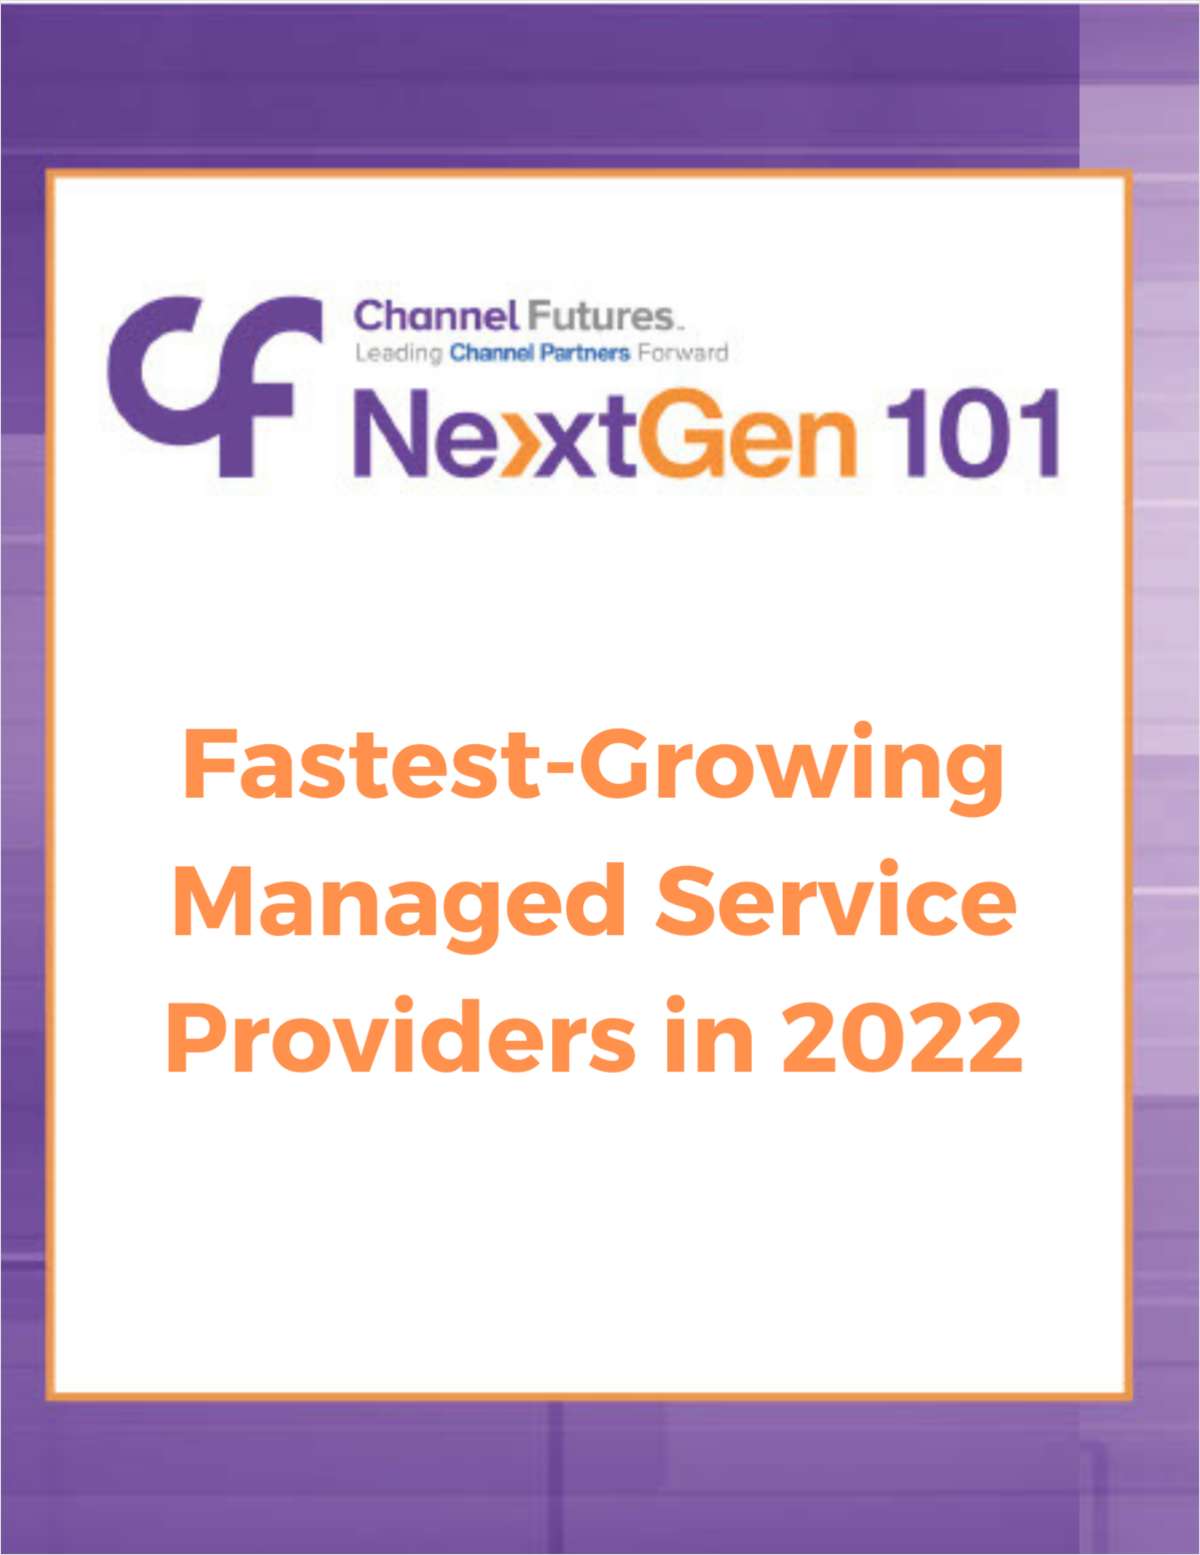 Fastest-Growing Managed Service Providers in 2022